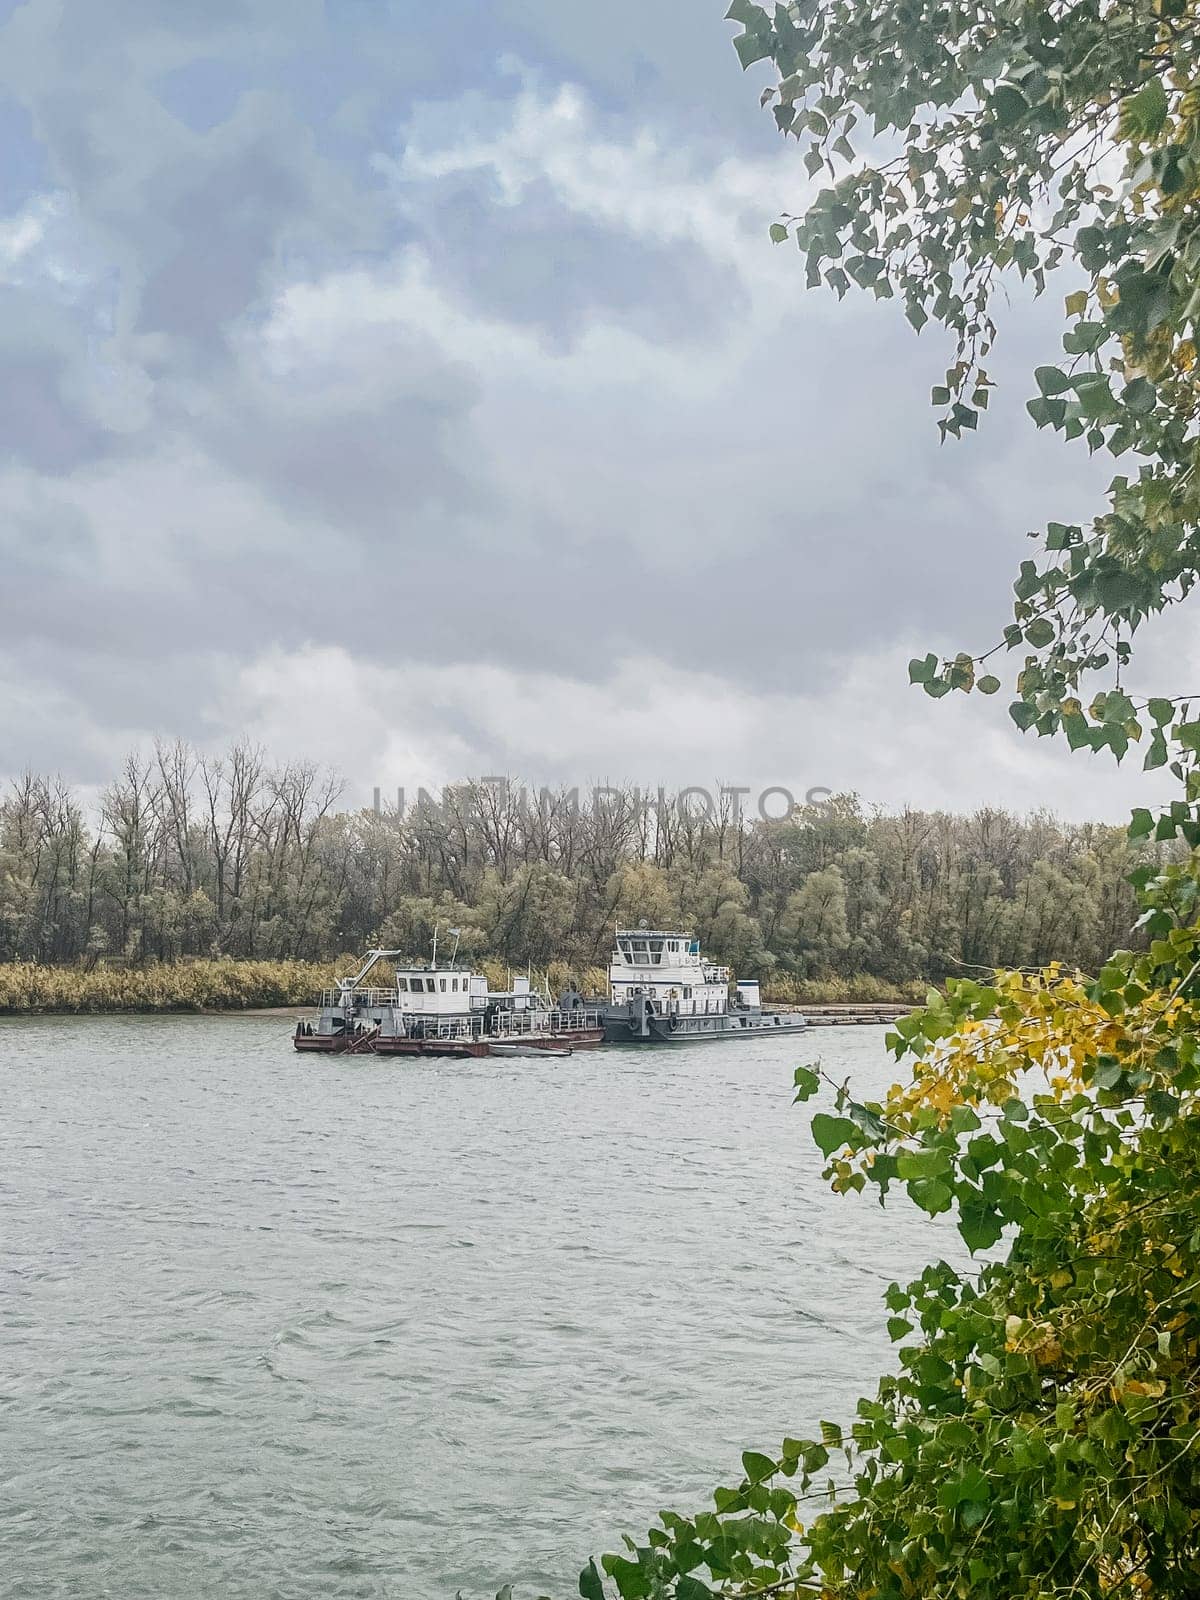 The image captures the serene scene of tugboats navigating the river under a cloudy sky with autumn trees on the shore.